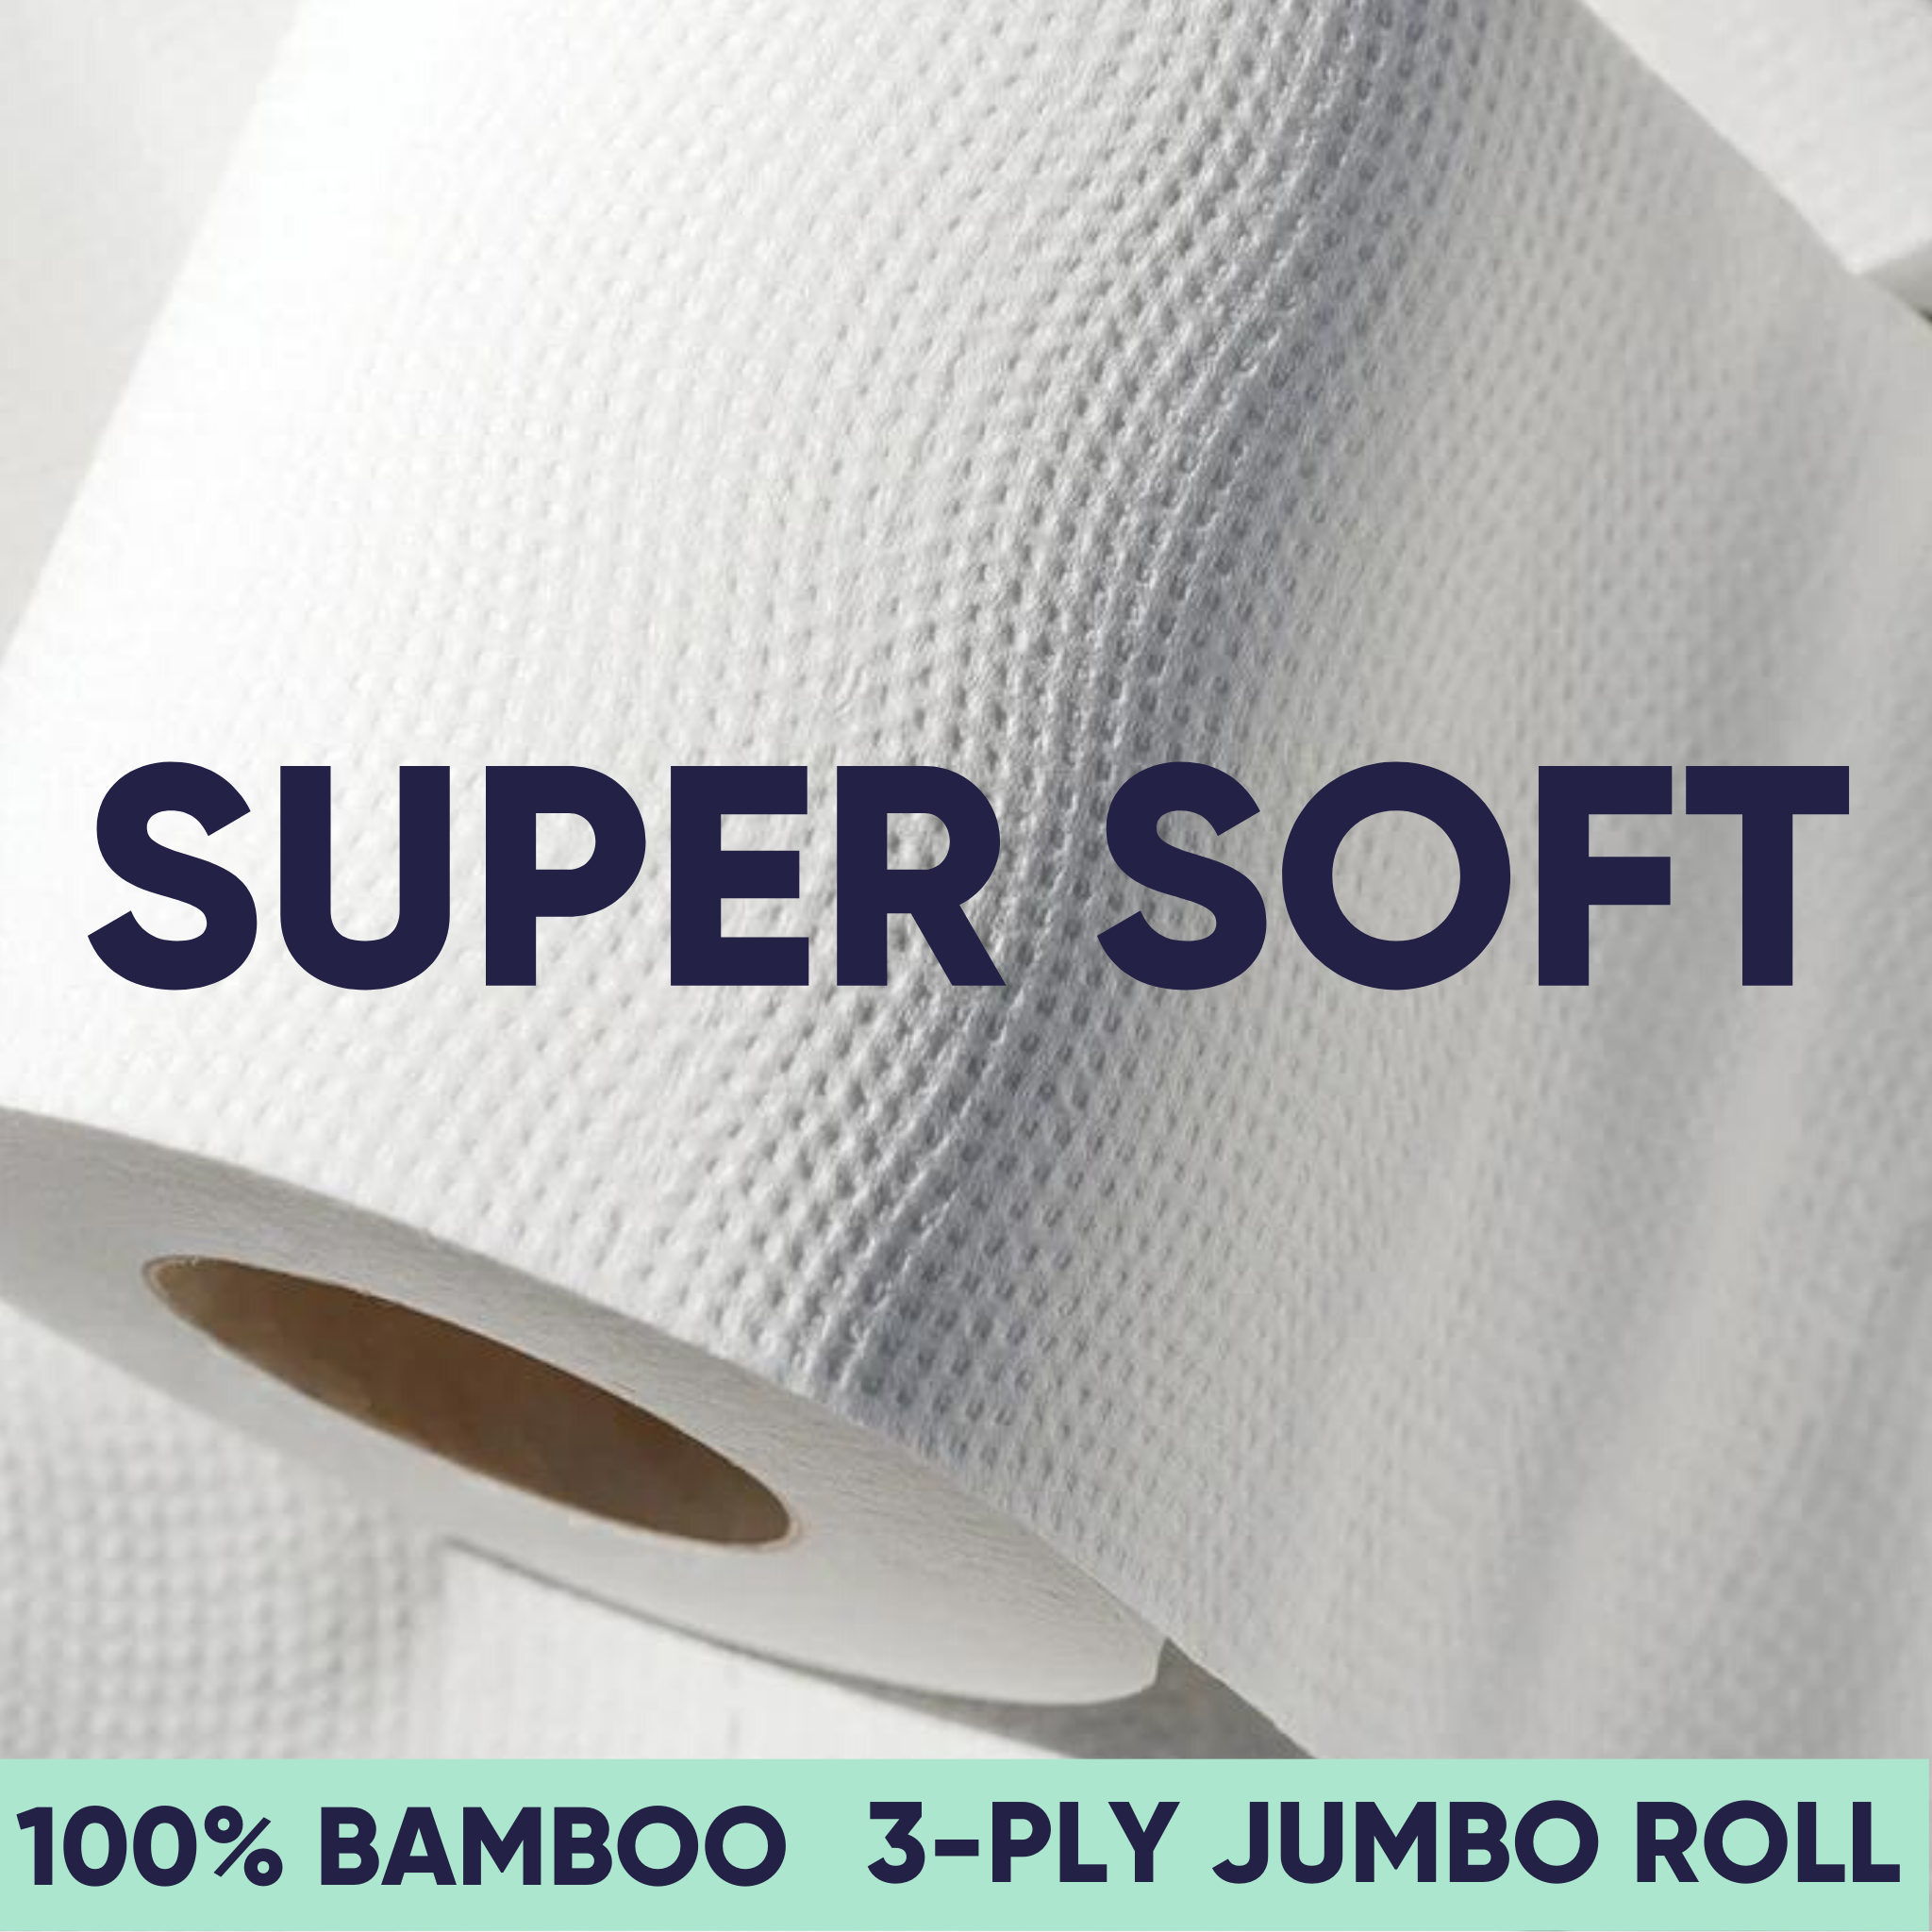 100% Bamboo Toilet Paper by Cloud Paper